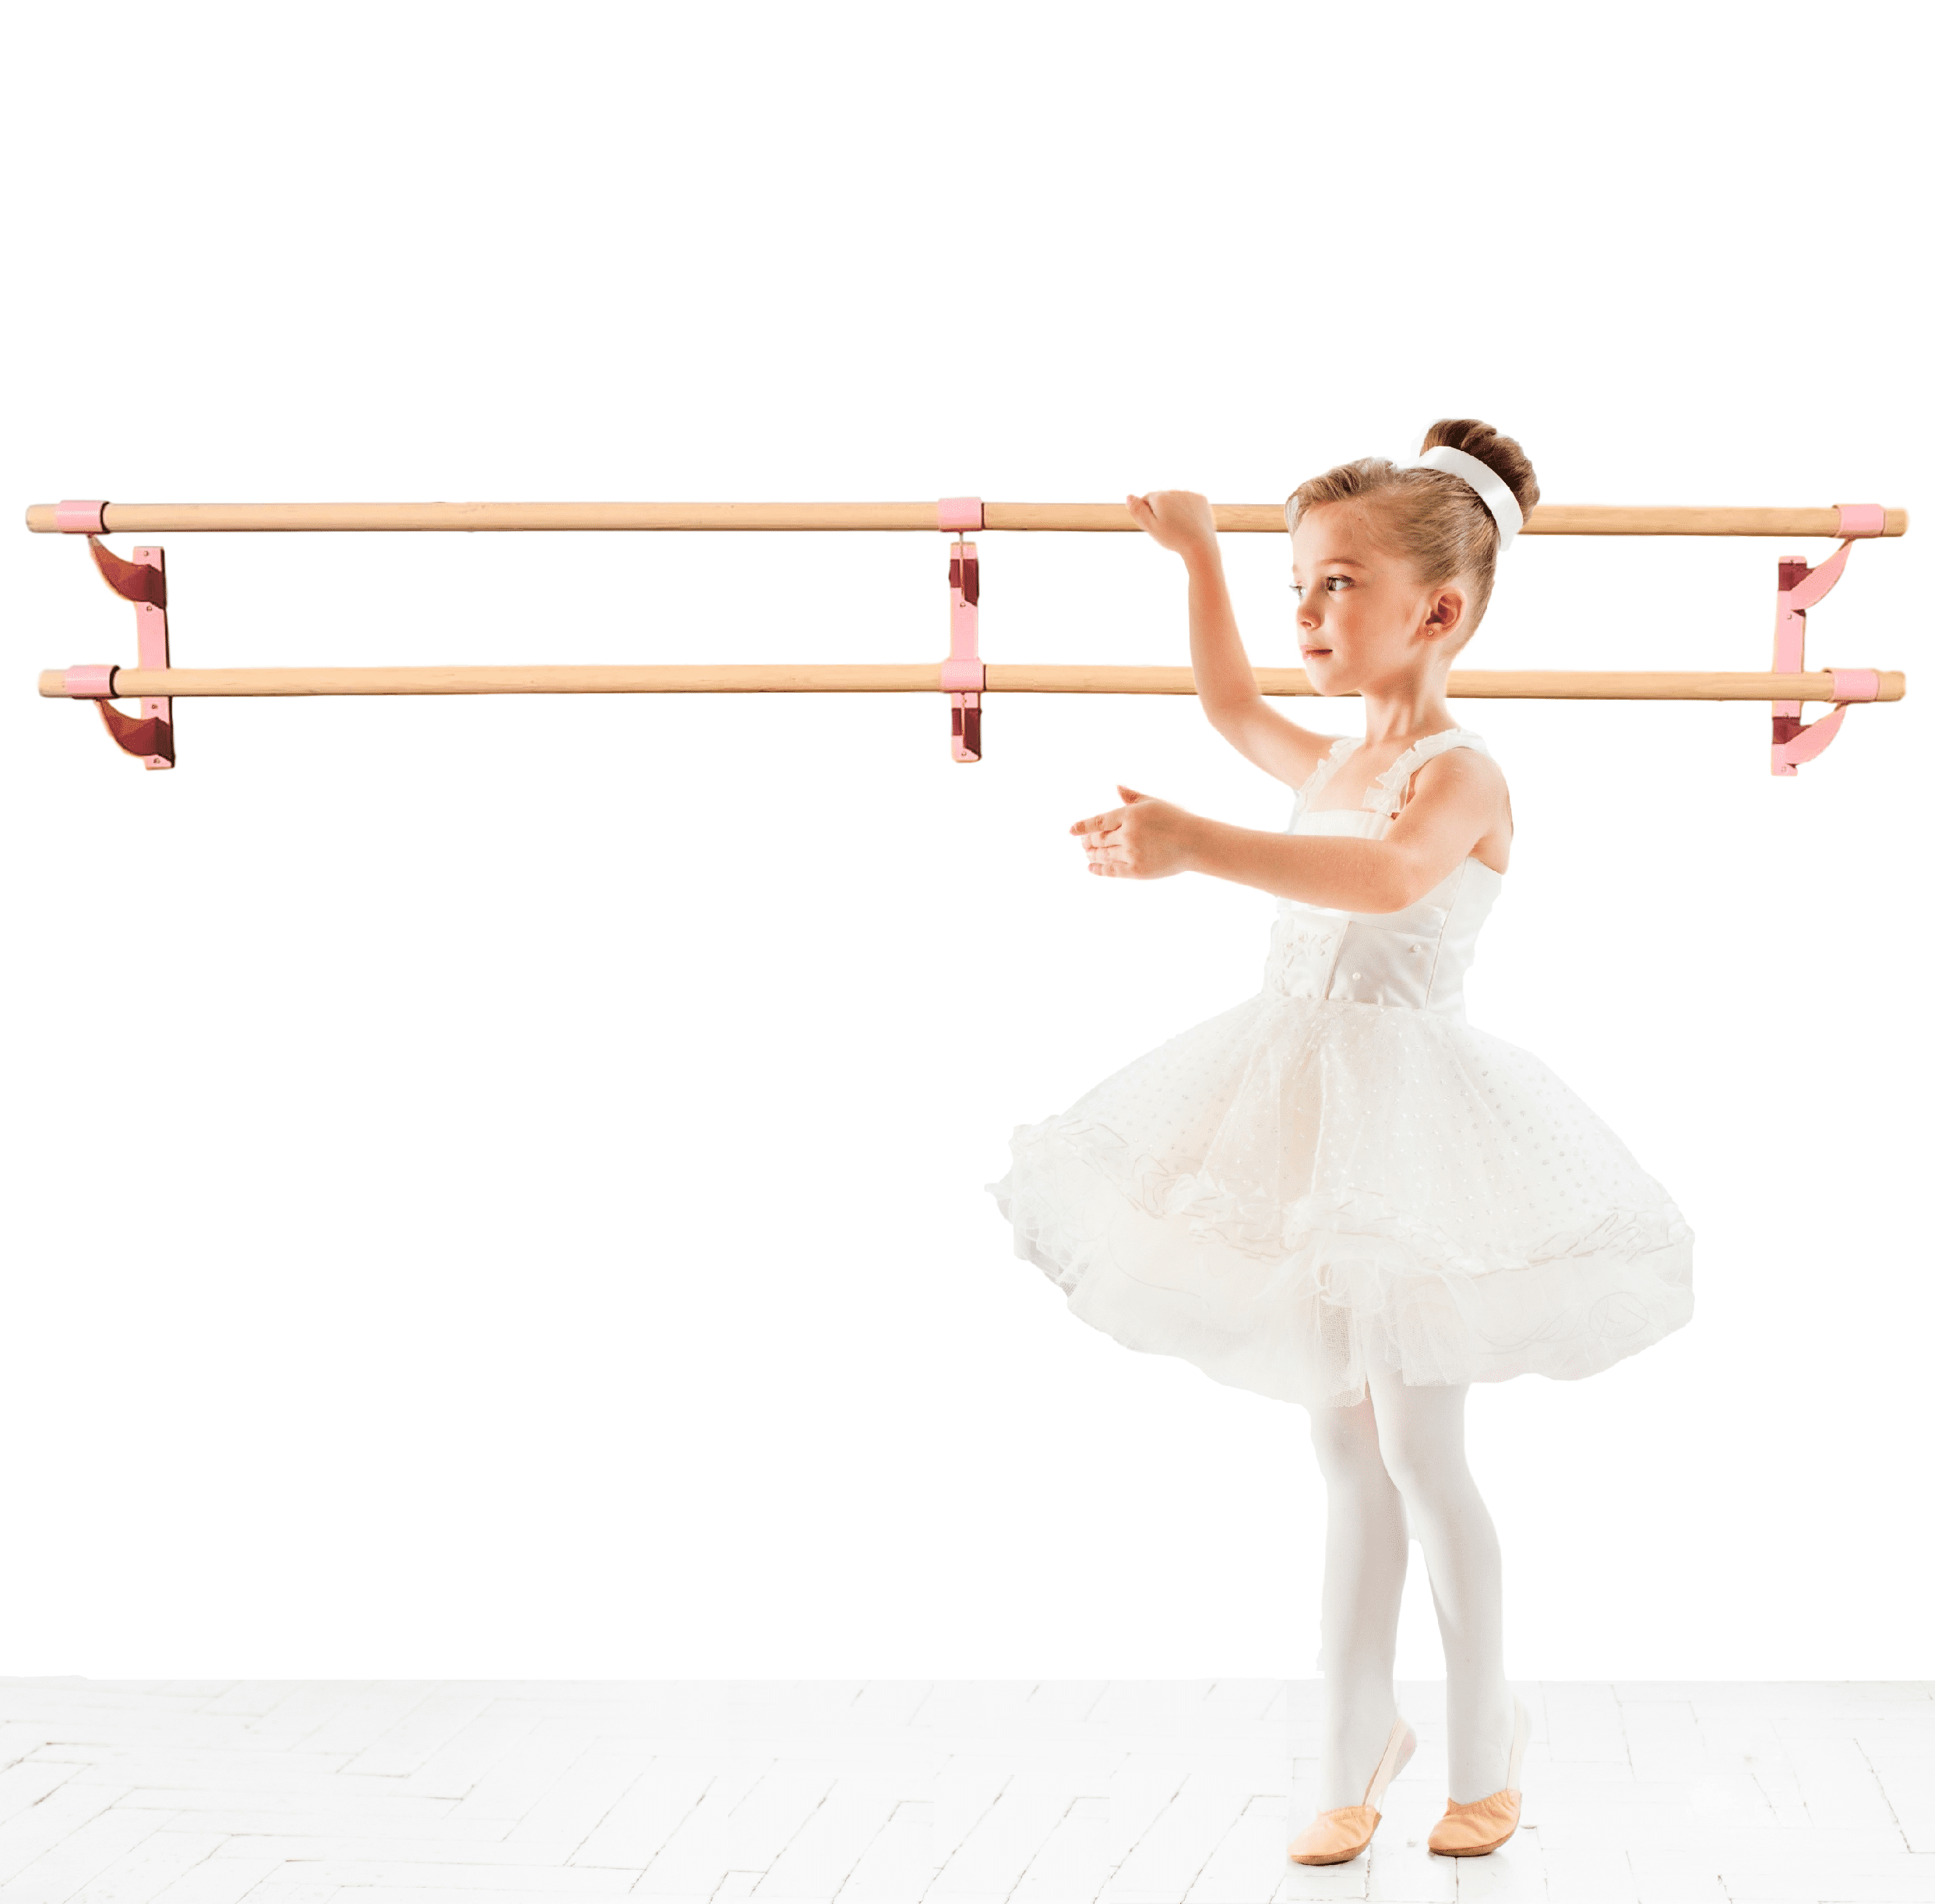 Athletic Bar Ballet Barre 15 Ft Long Double Bar Pink 2 0 Diameter Fixed Height Wall Mount Ballet Barre System Traditional Wood Home Or Studio Ballet Bar Dance Stretch Bar Dancing Stretching Bar